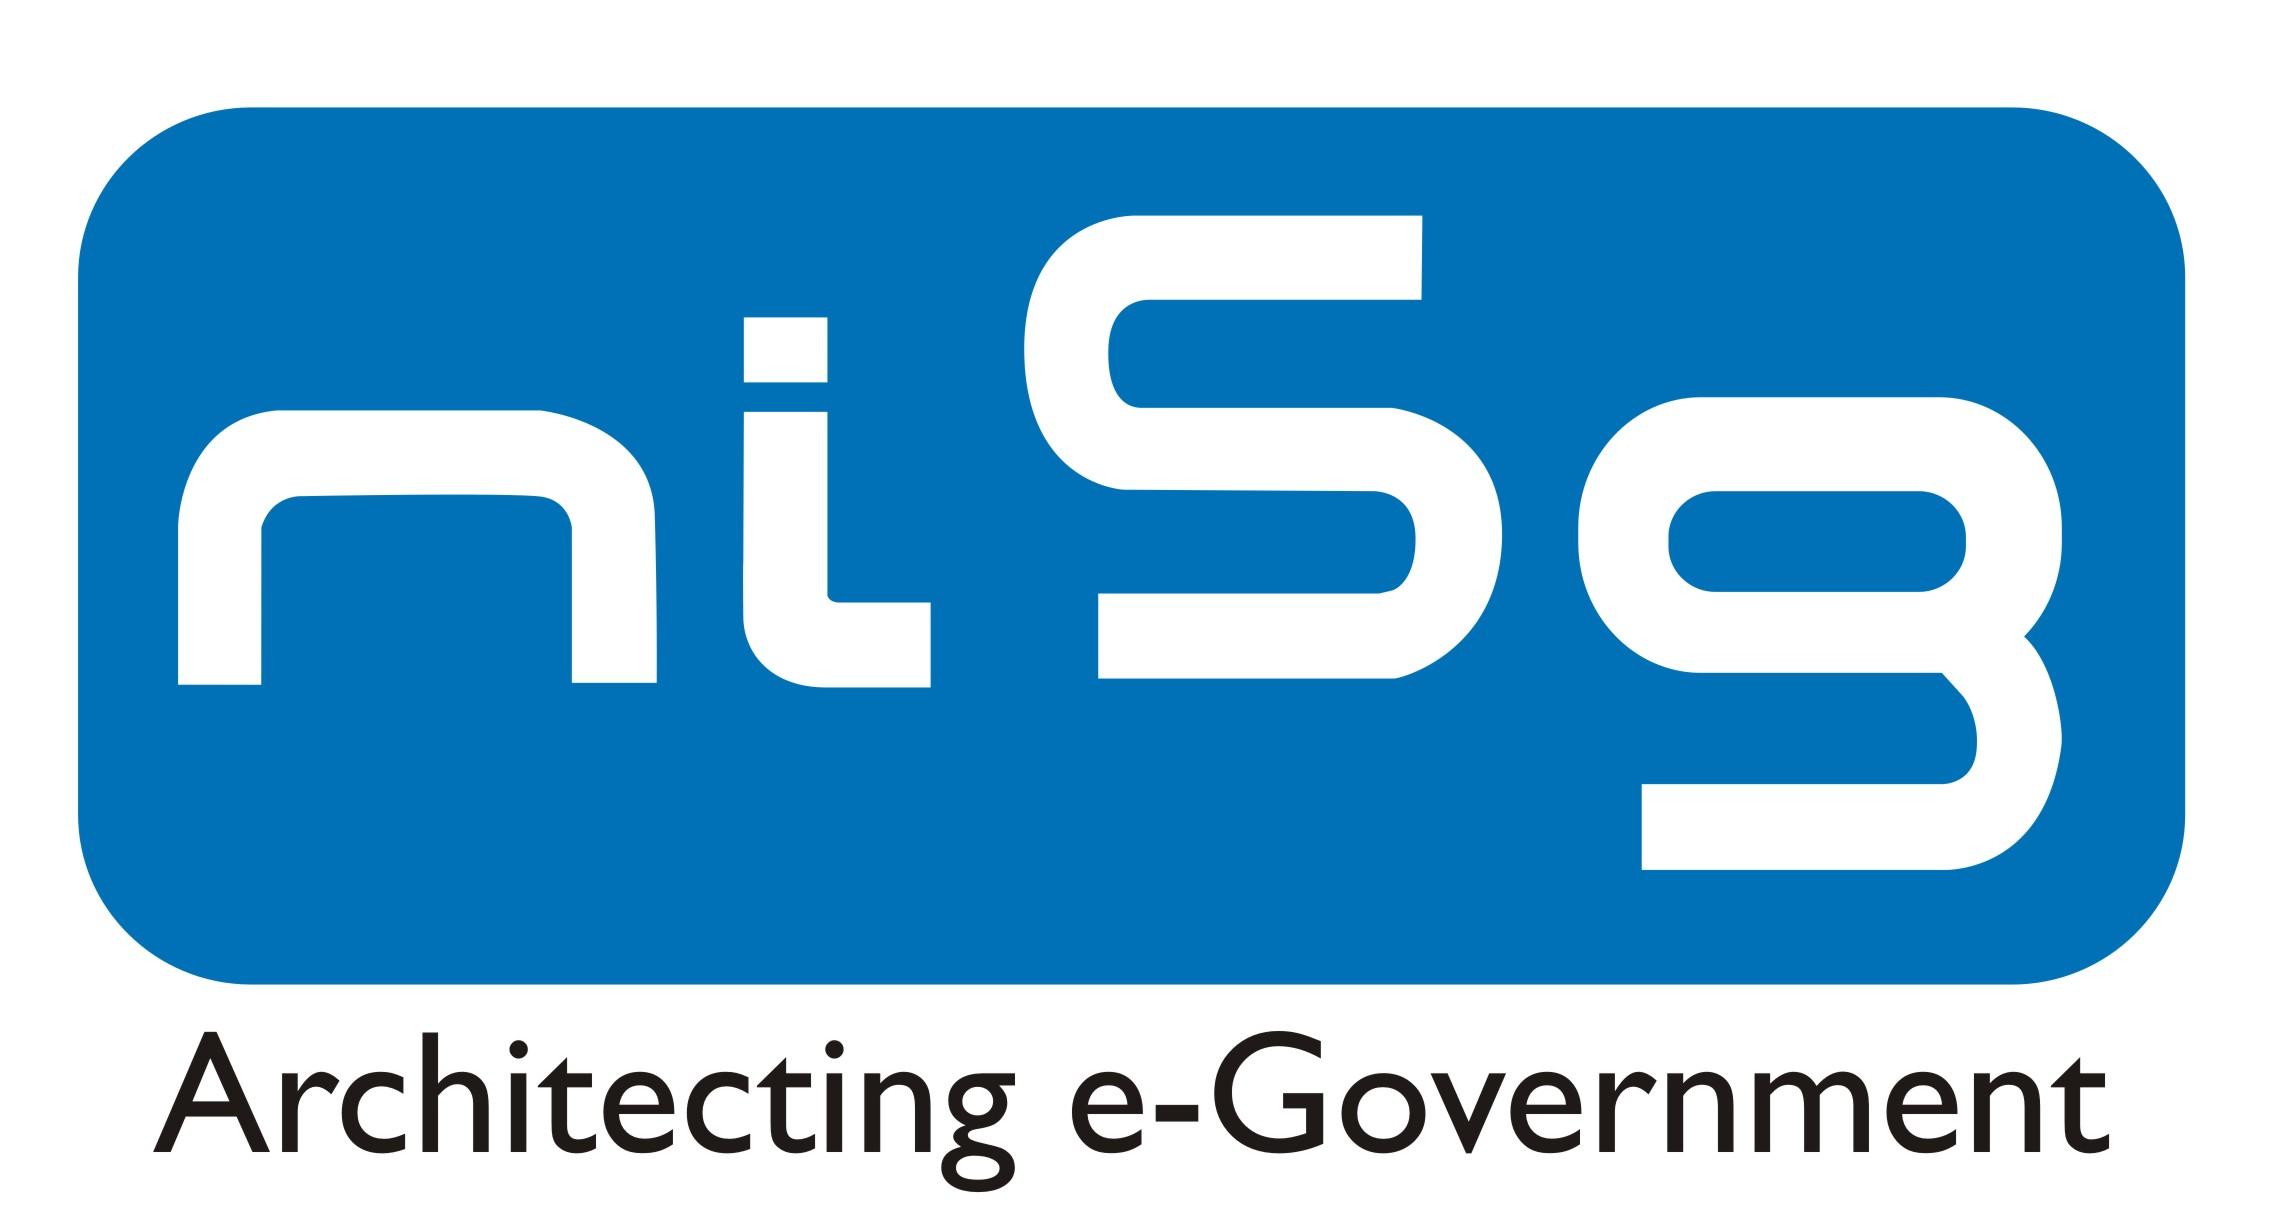 National Institute for Smart Government (NISG)